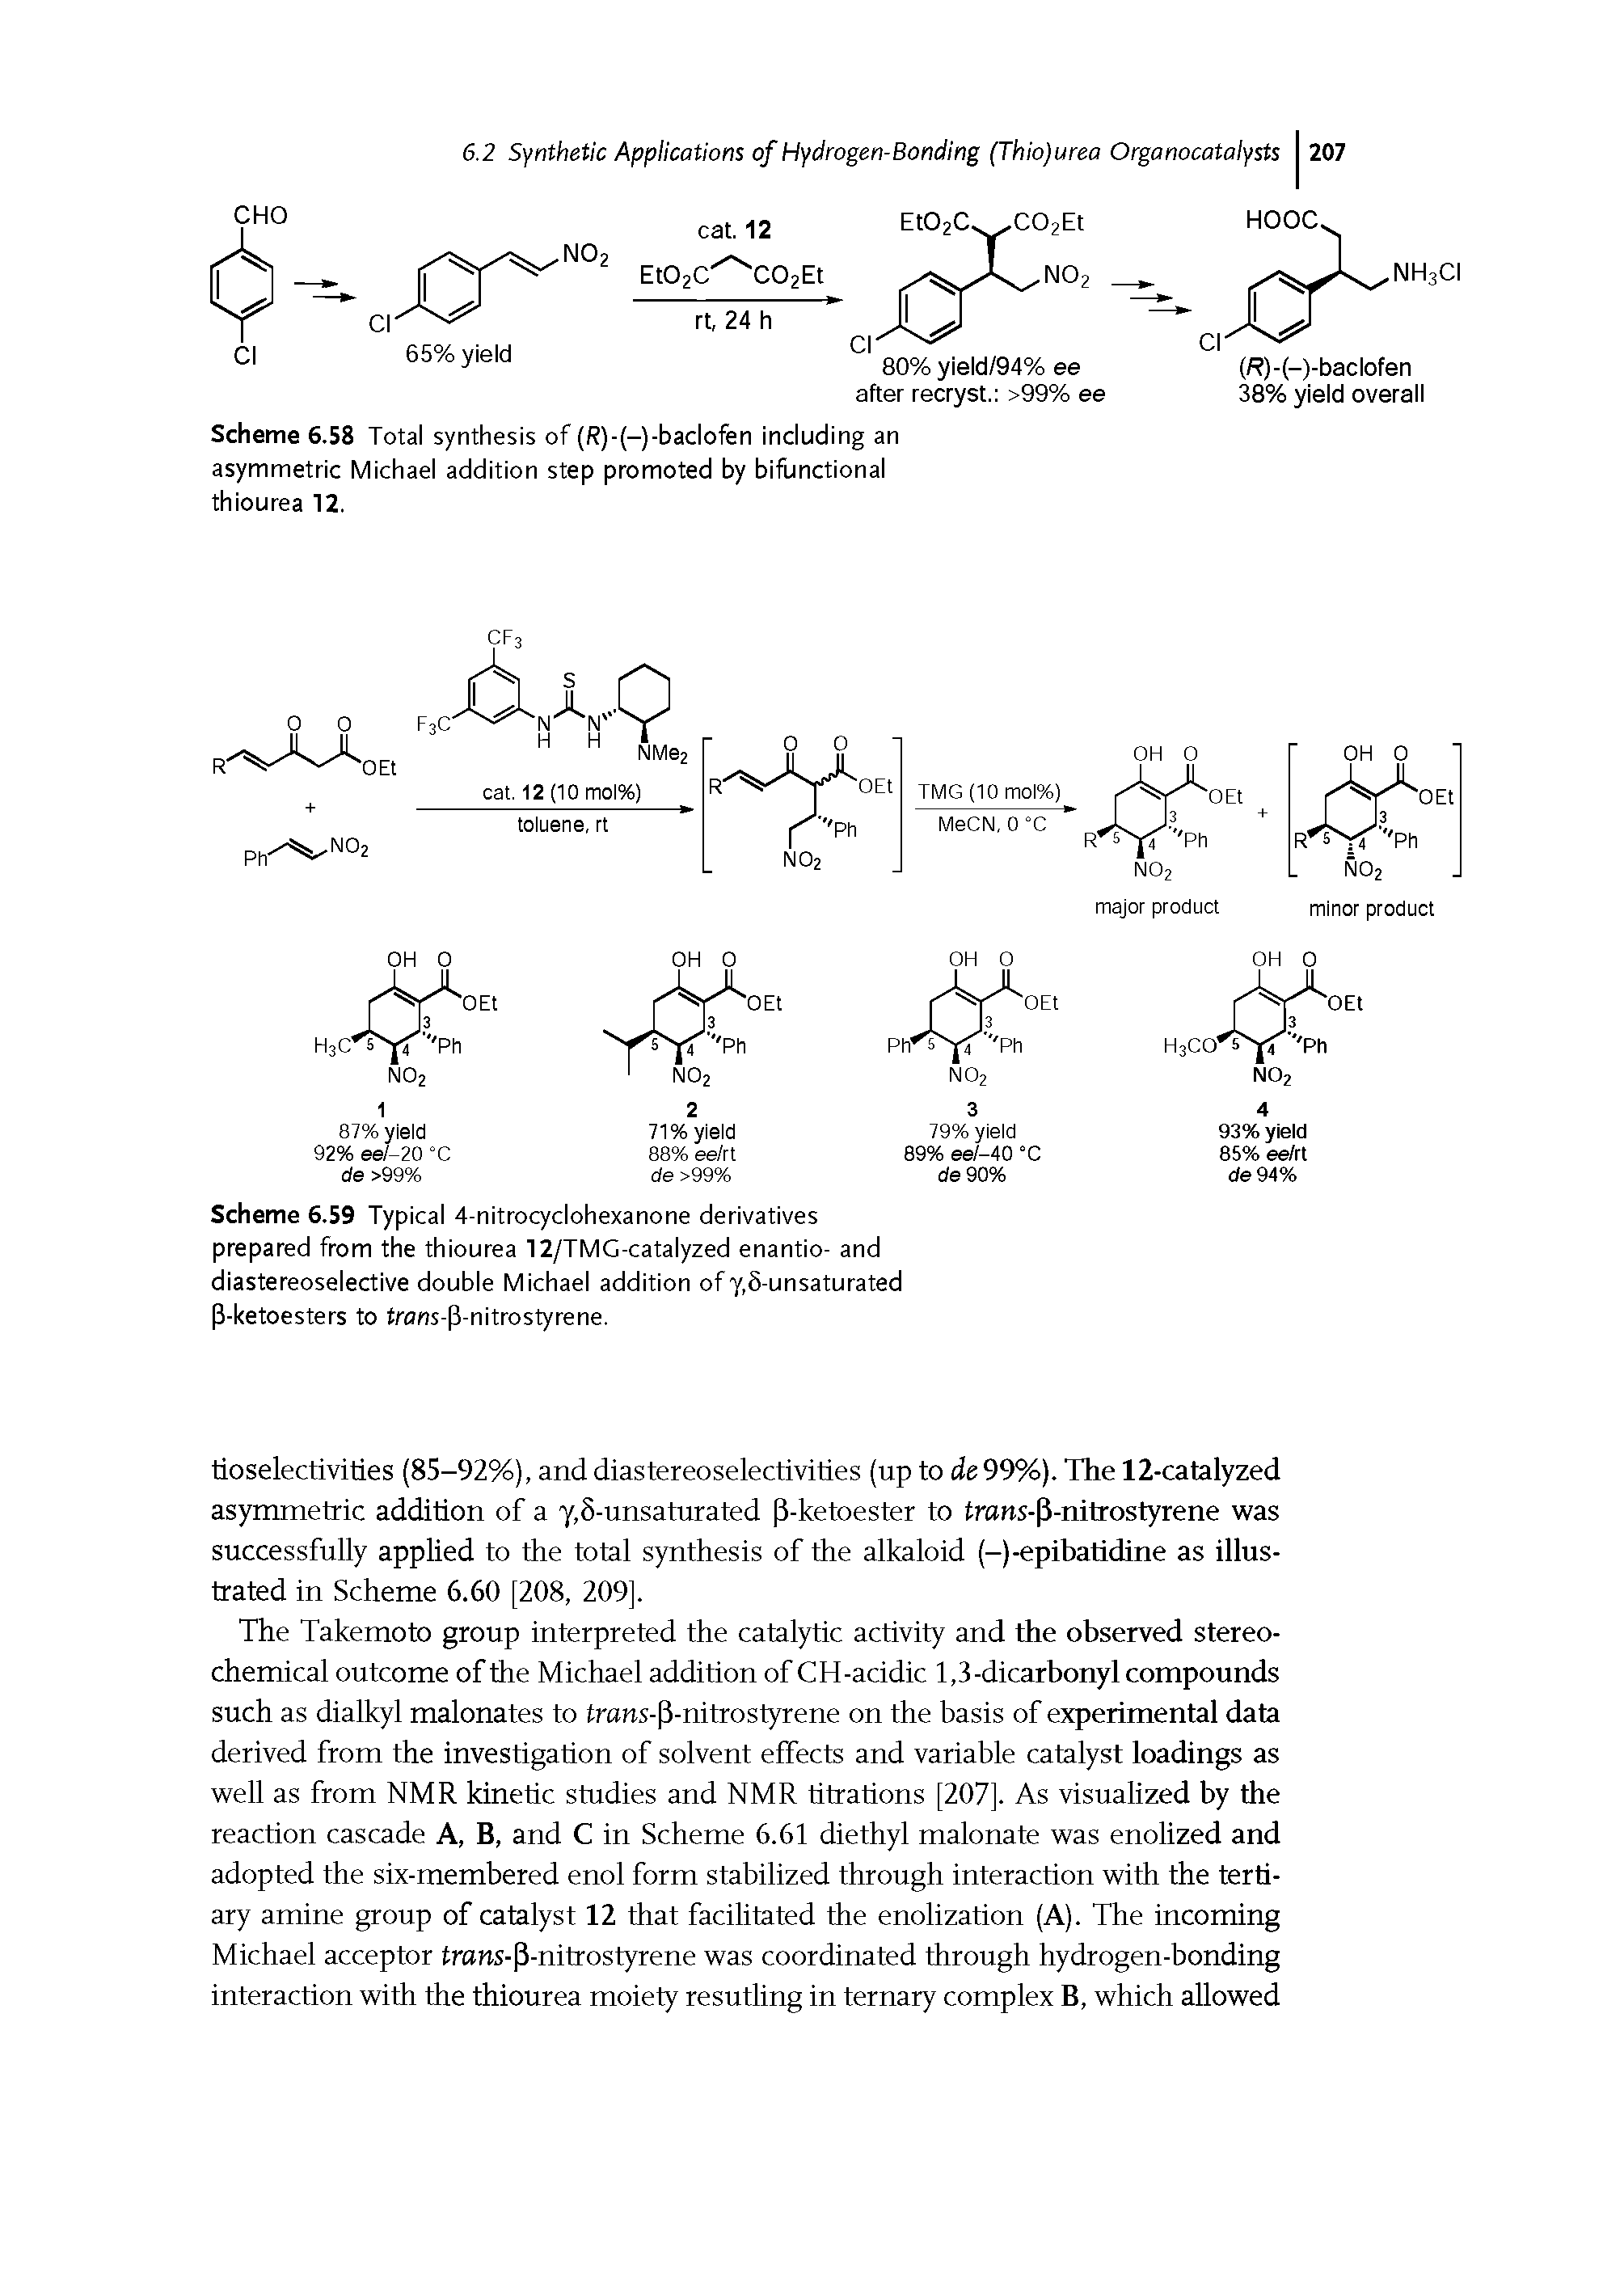 Scheme 6.59 Typical 4-nitrocyclohexanone derivatives prepared from the thiourea 12/TMC-catalyzed enantio- and diastereoselective double Michael addition of y,5-unsaturated P-ketoesters to frans-P-nitrostyrene.